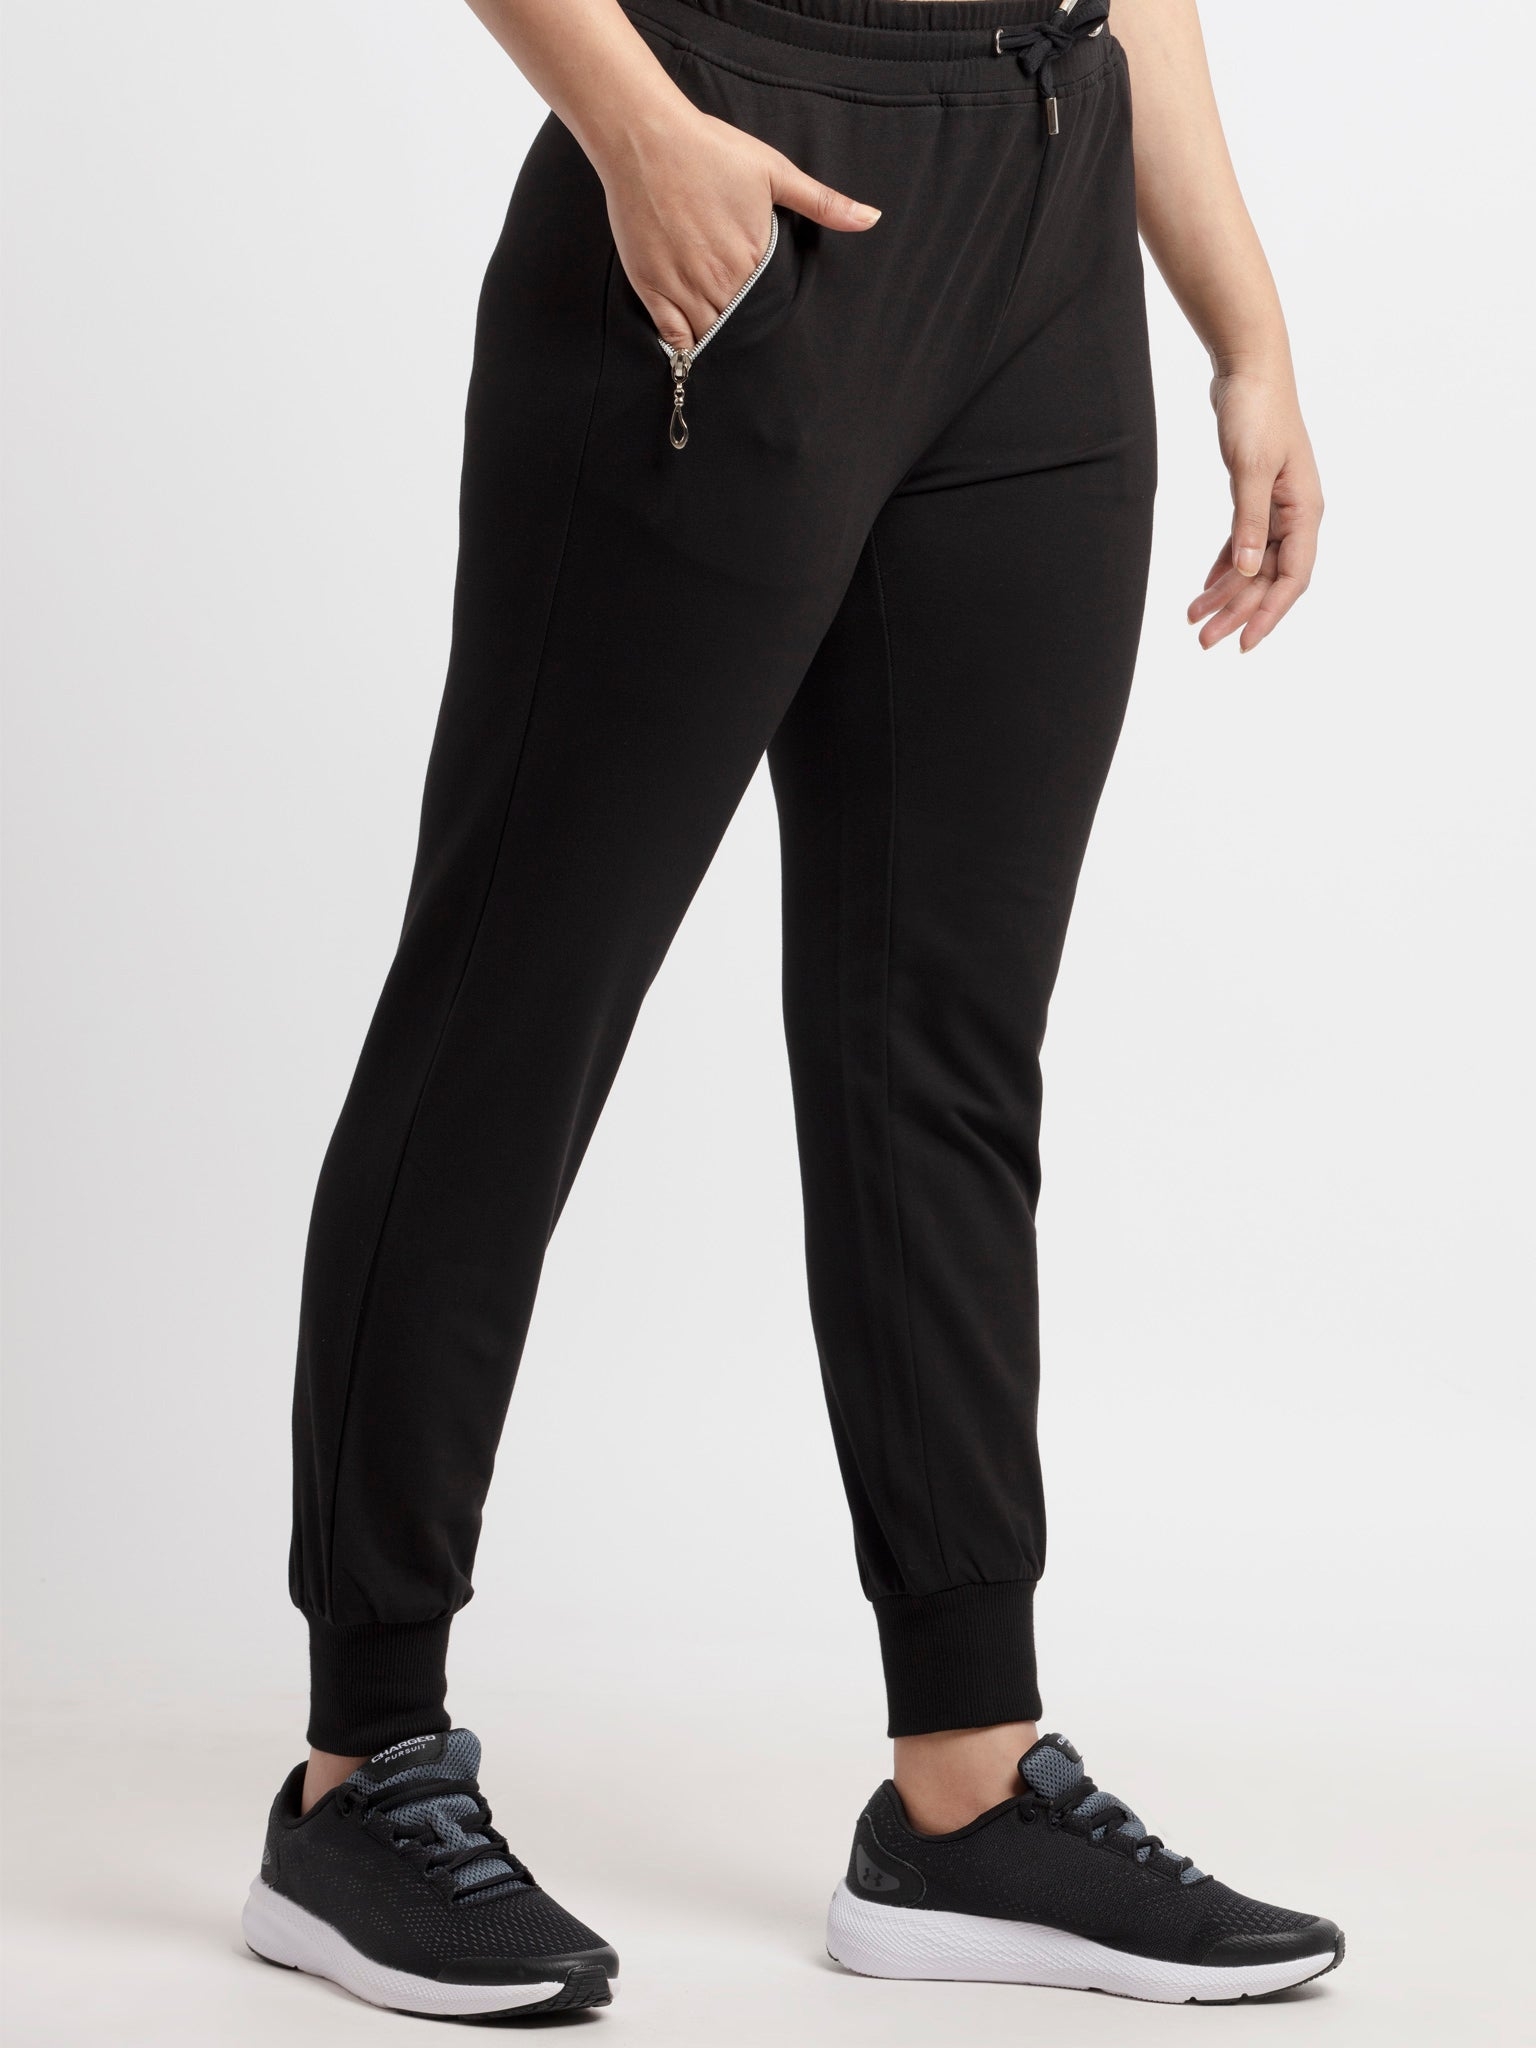 Status Quo | Women'ss Full length Solid Joggers 2